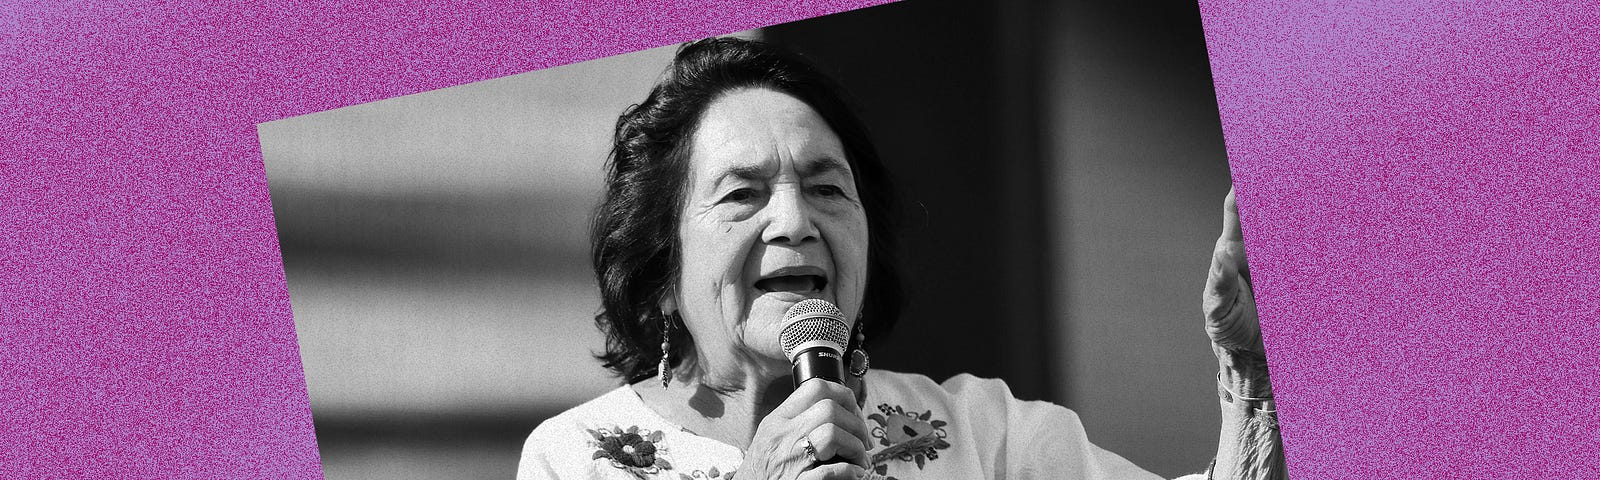 Black and white photo of Dolores Huerta against a violet background.